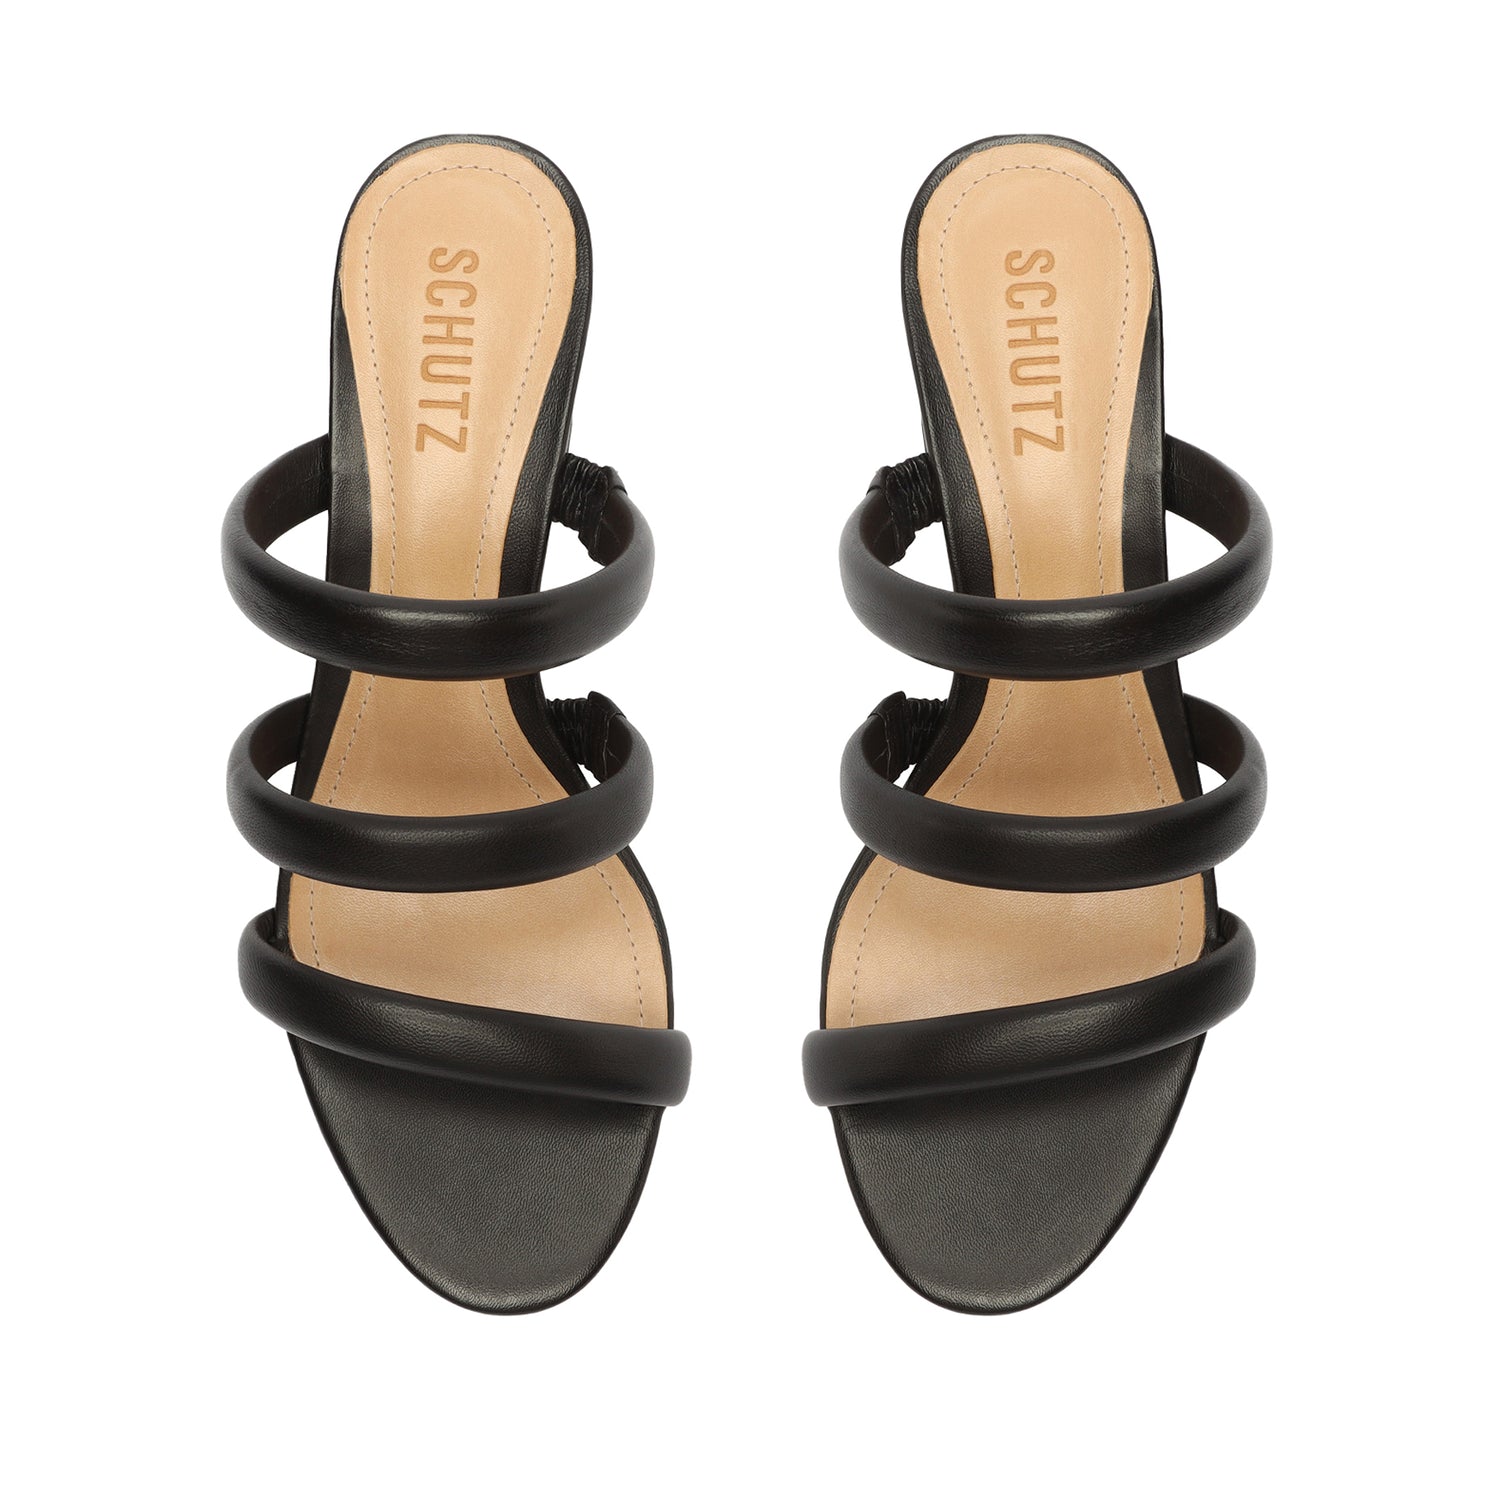 Olly Mid Block Nappa Leather Sandal Black Nappa Leather